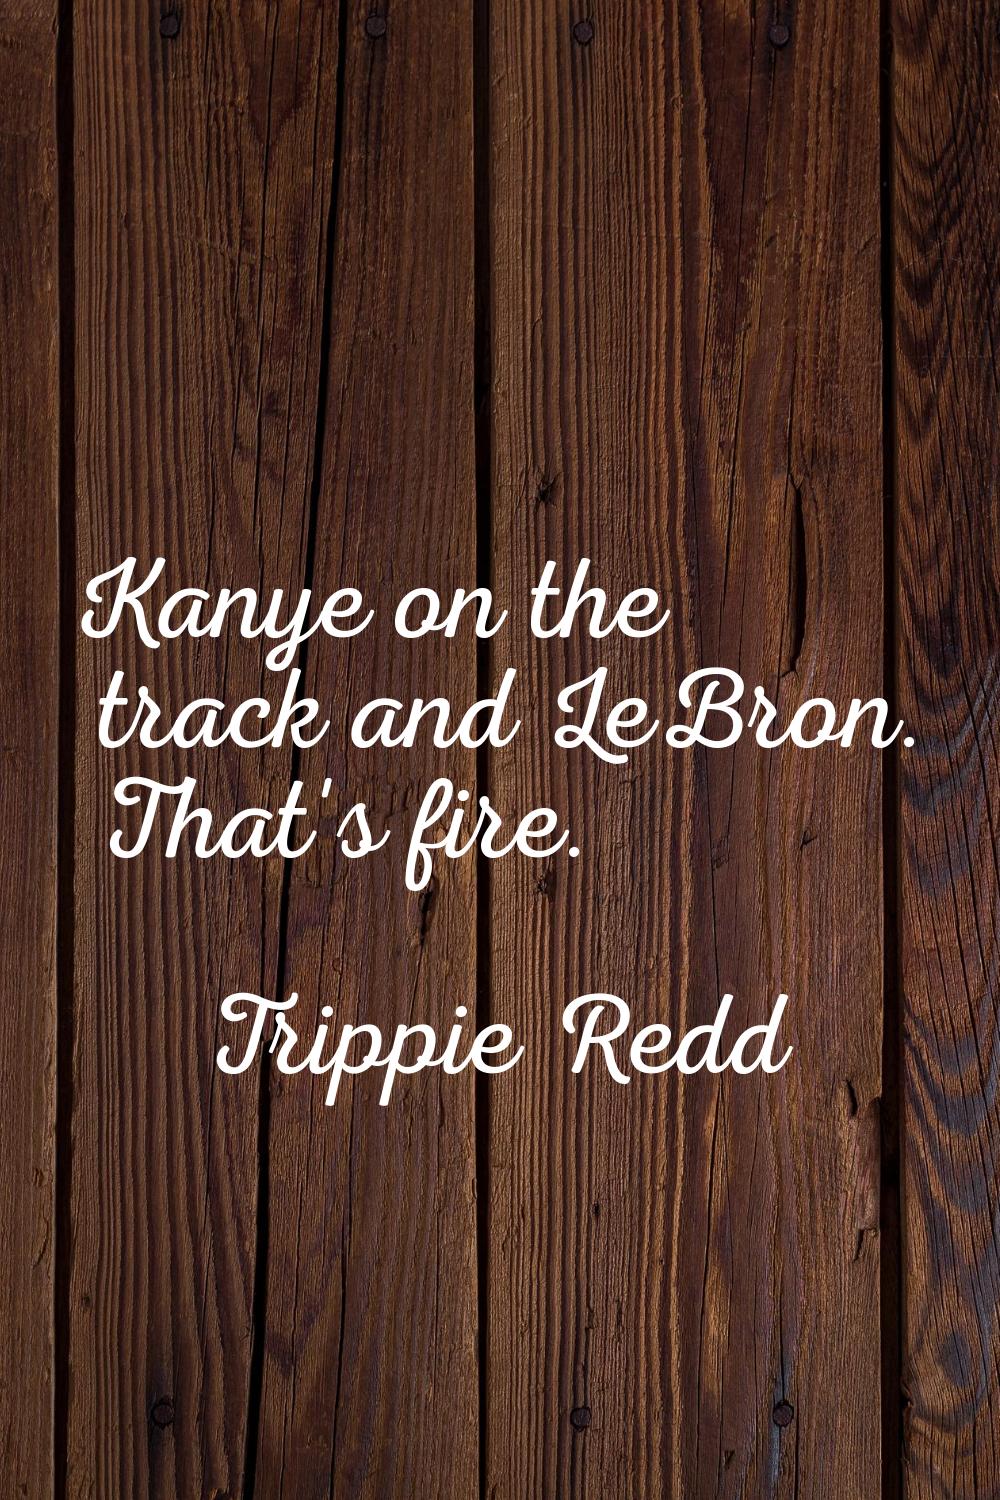 Kanye on the track and LeBron. That's fire.